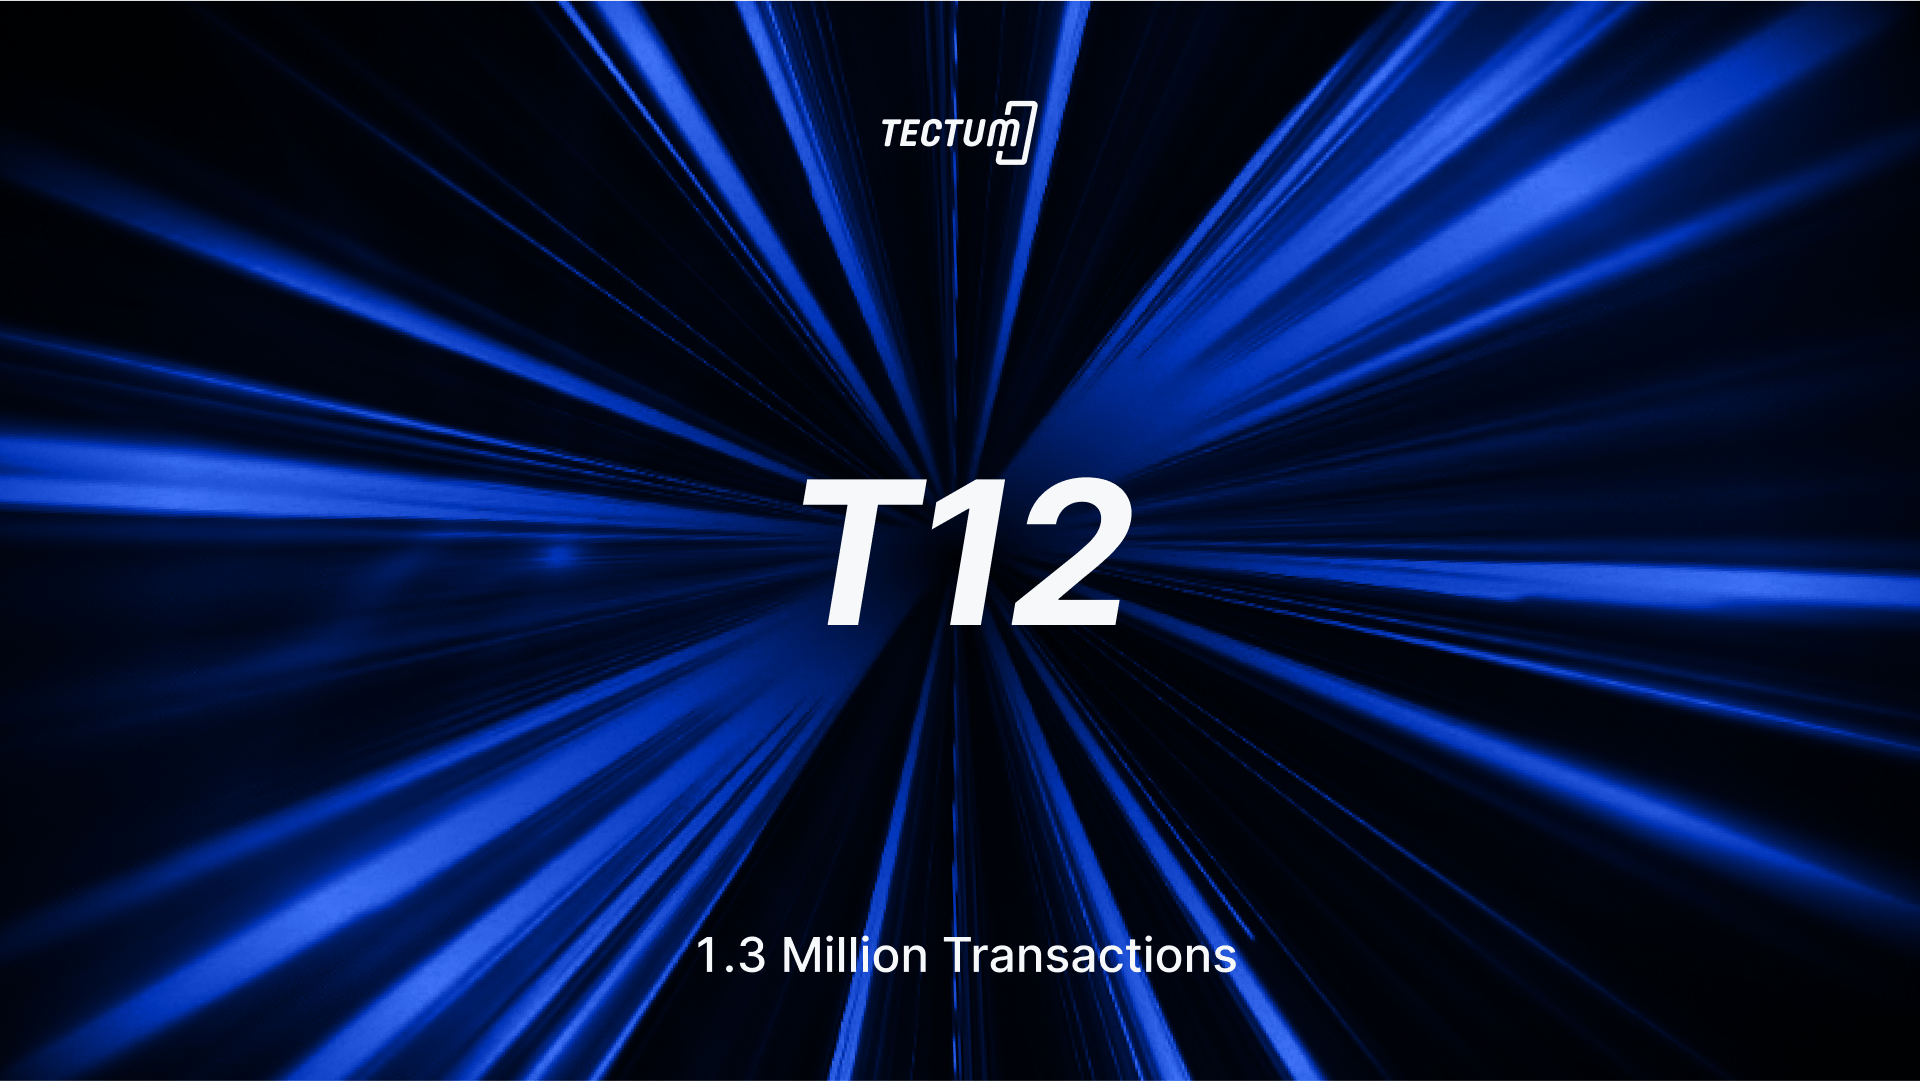 How the T12 Protocol Attains a Speed of 1.3 Million transactions?